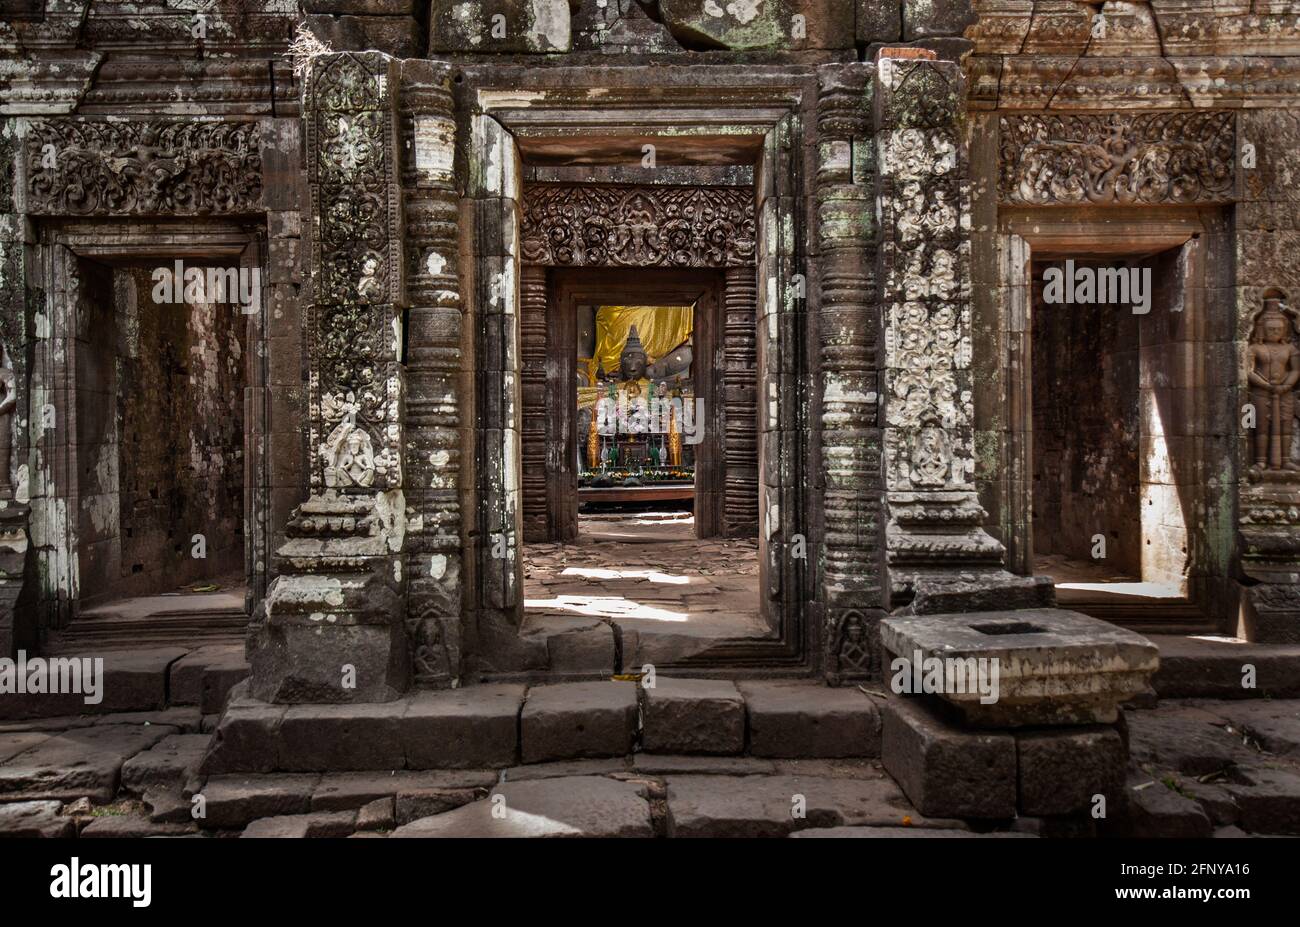 Sanctuary in the upper level of Wat Phu, a UNESCO world heritage site in Champasak Province of Lao PDR Stock Photo